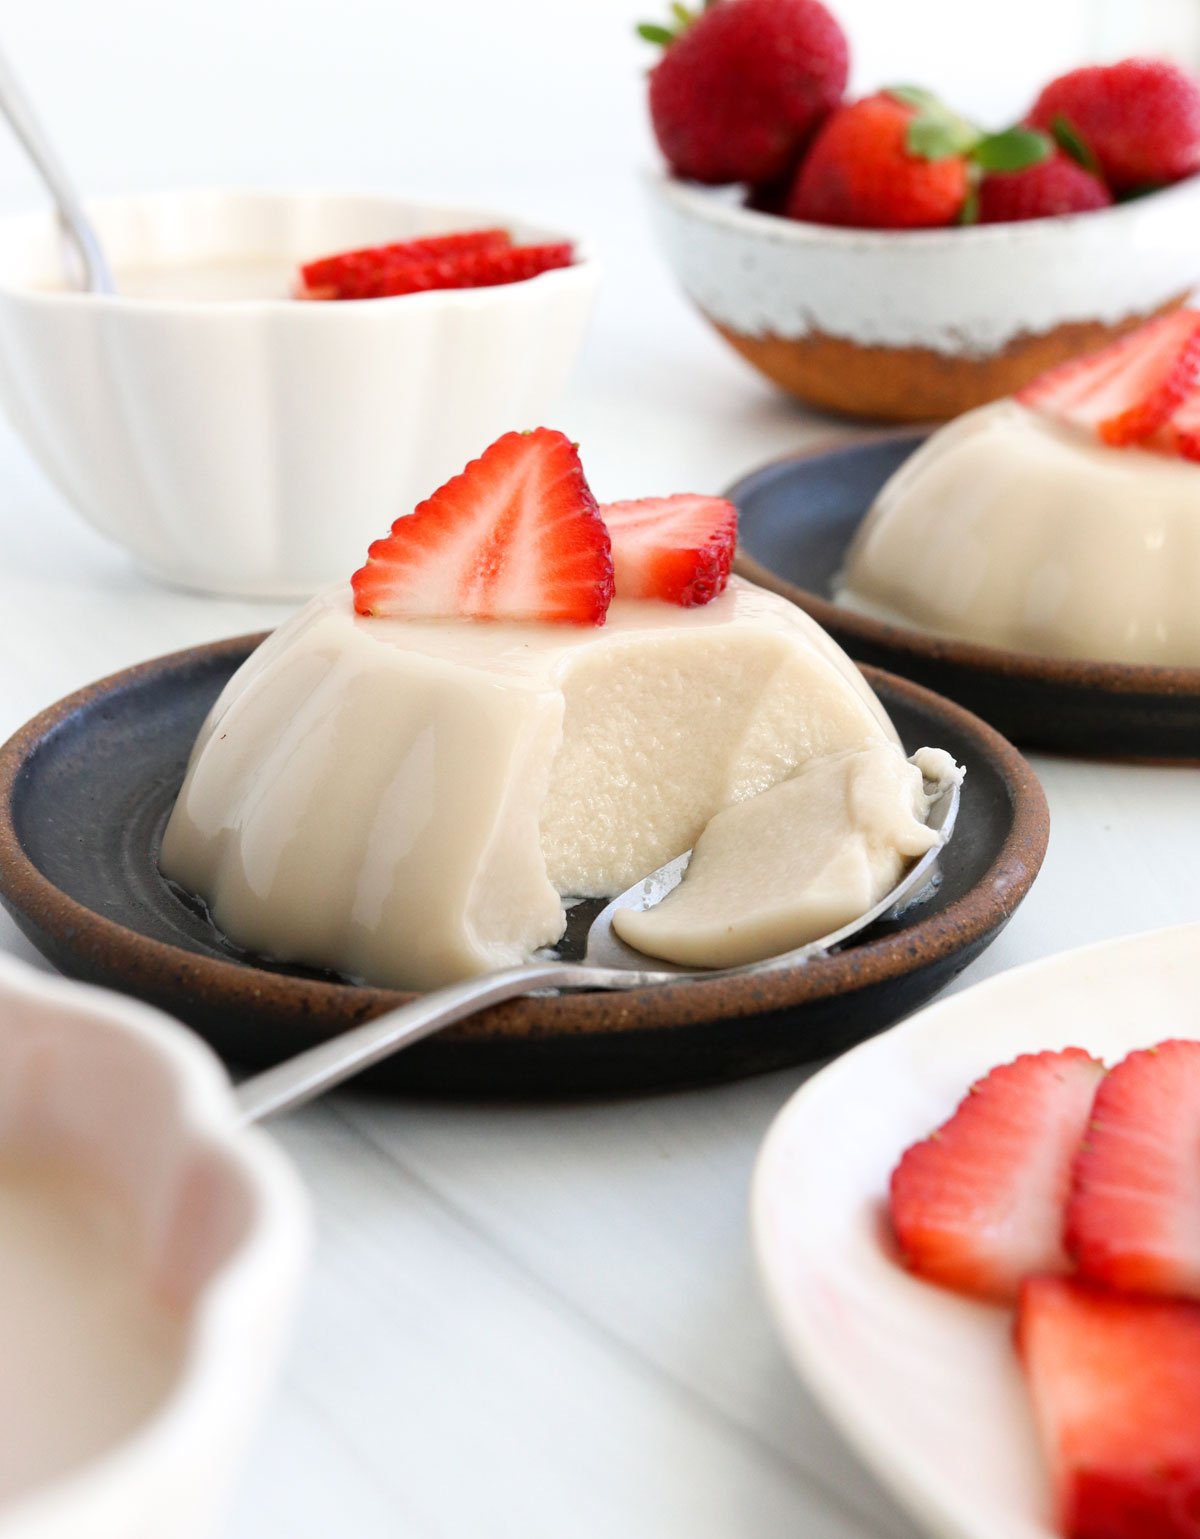 coconut panna cotta served with strawberries and a bite removed